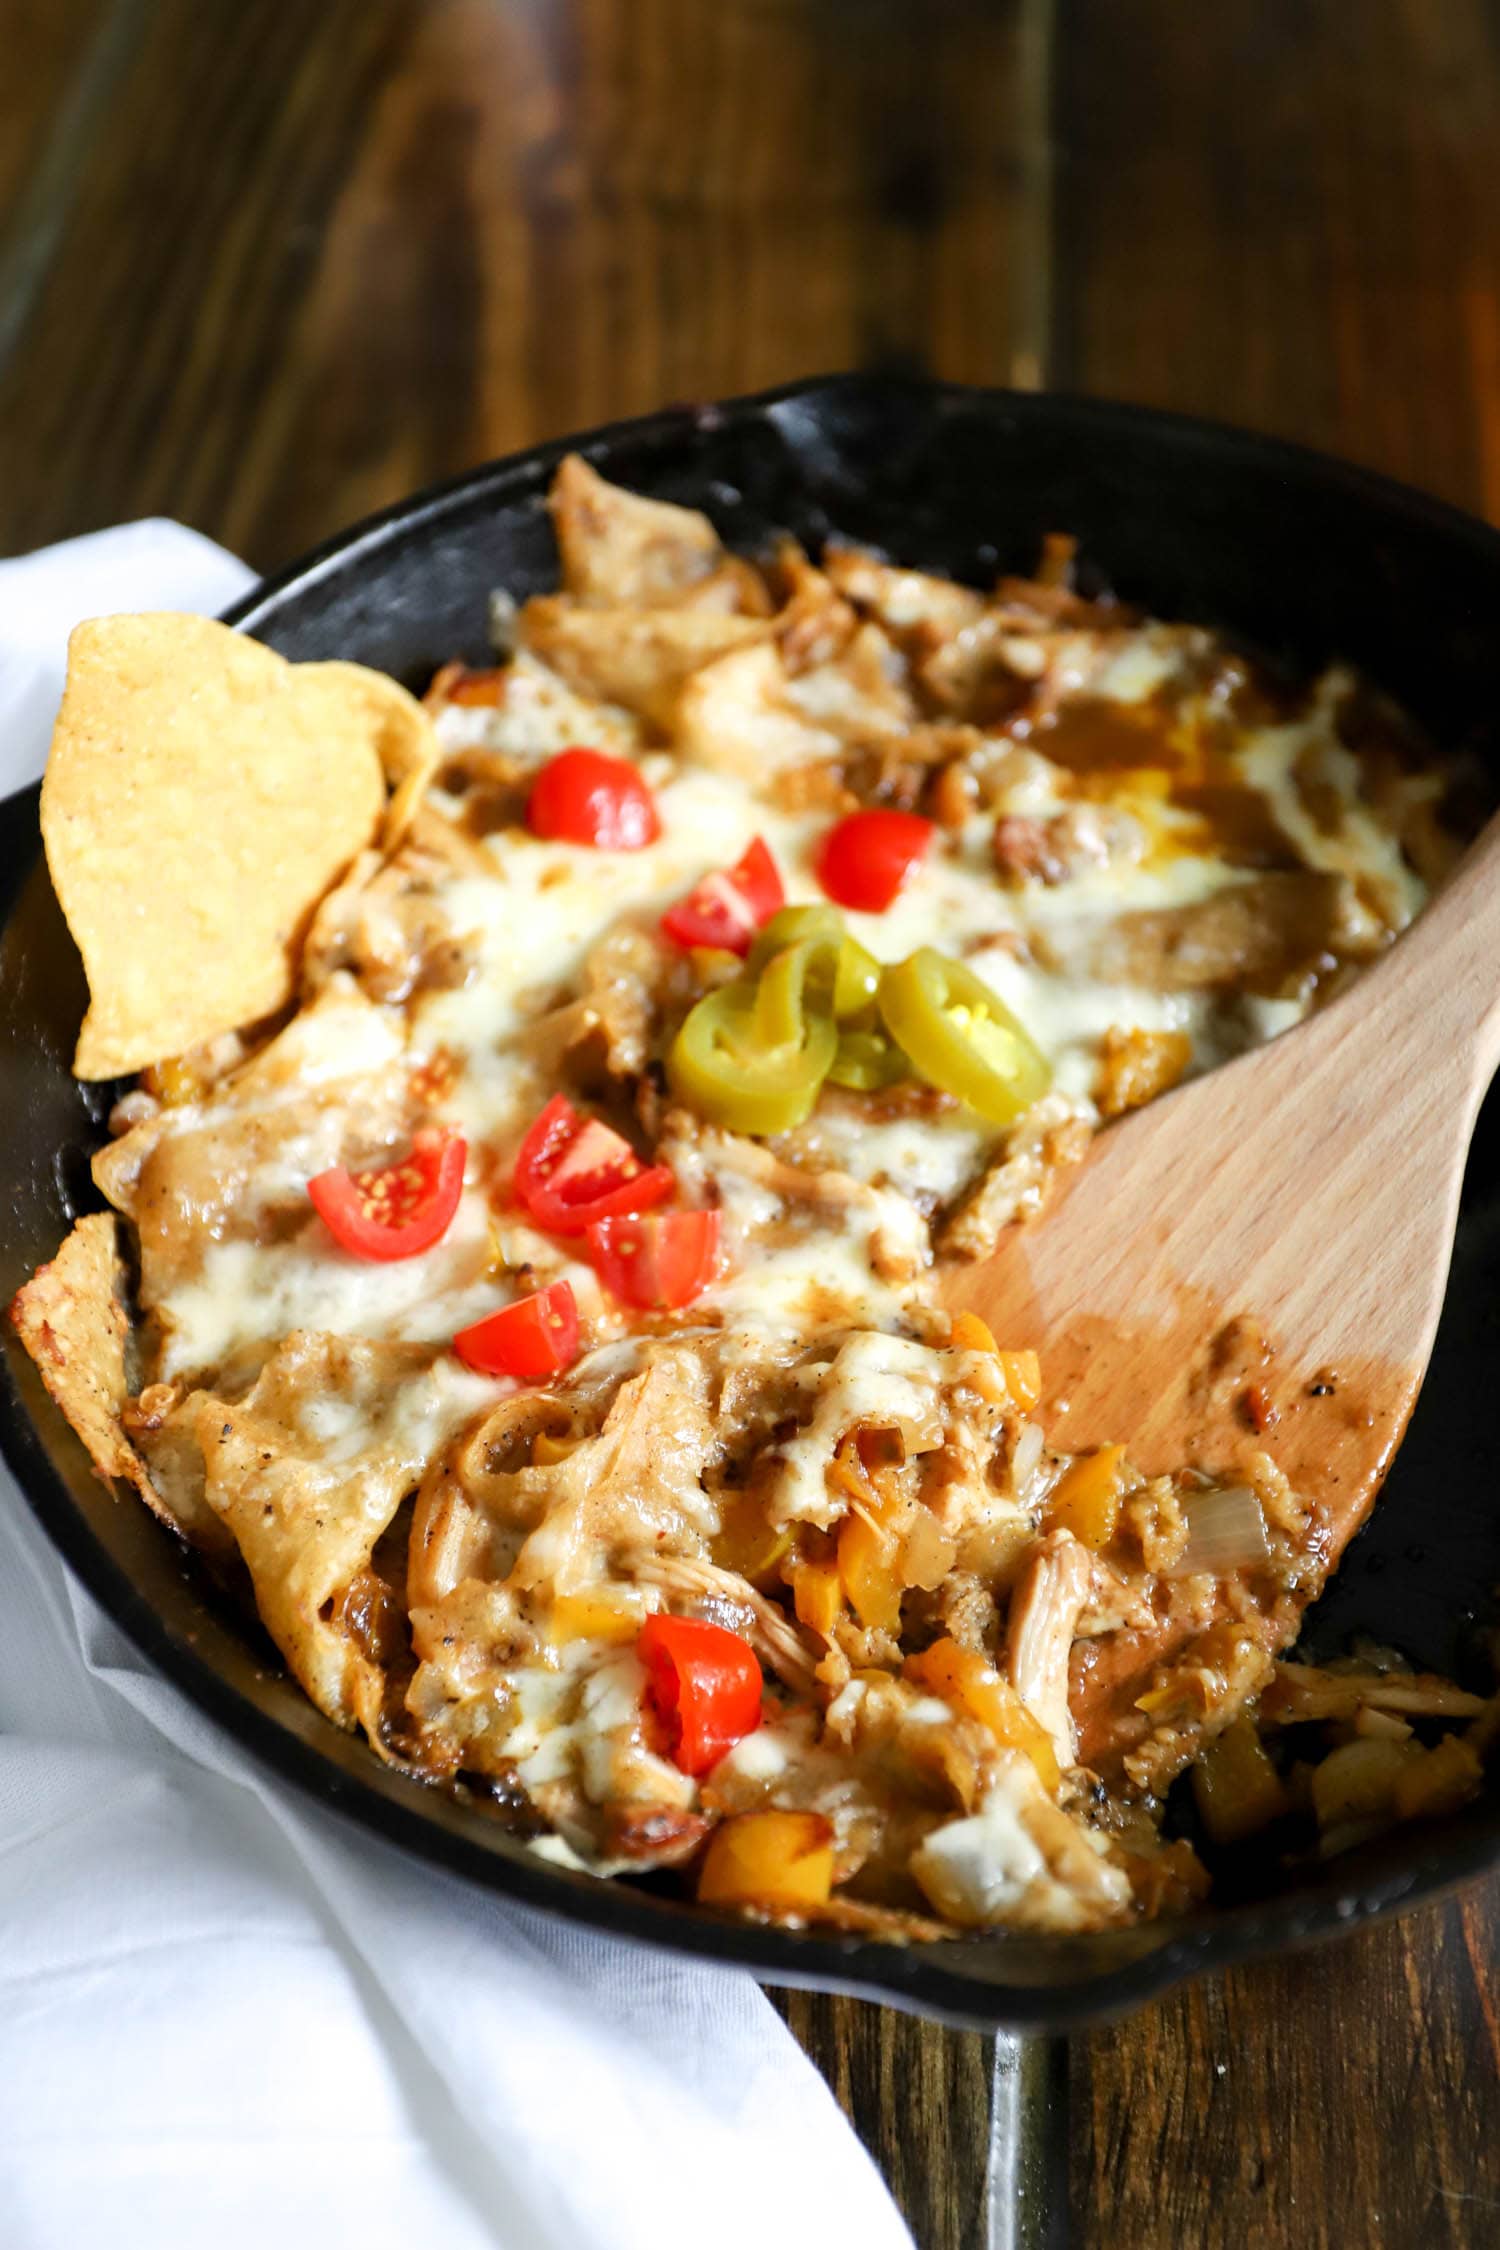 How to make chilaquiles verdes with chips, chicken, and green enchilada sauce. Funnyloveblog.com